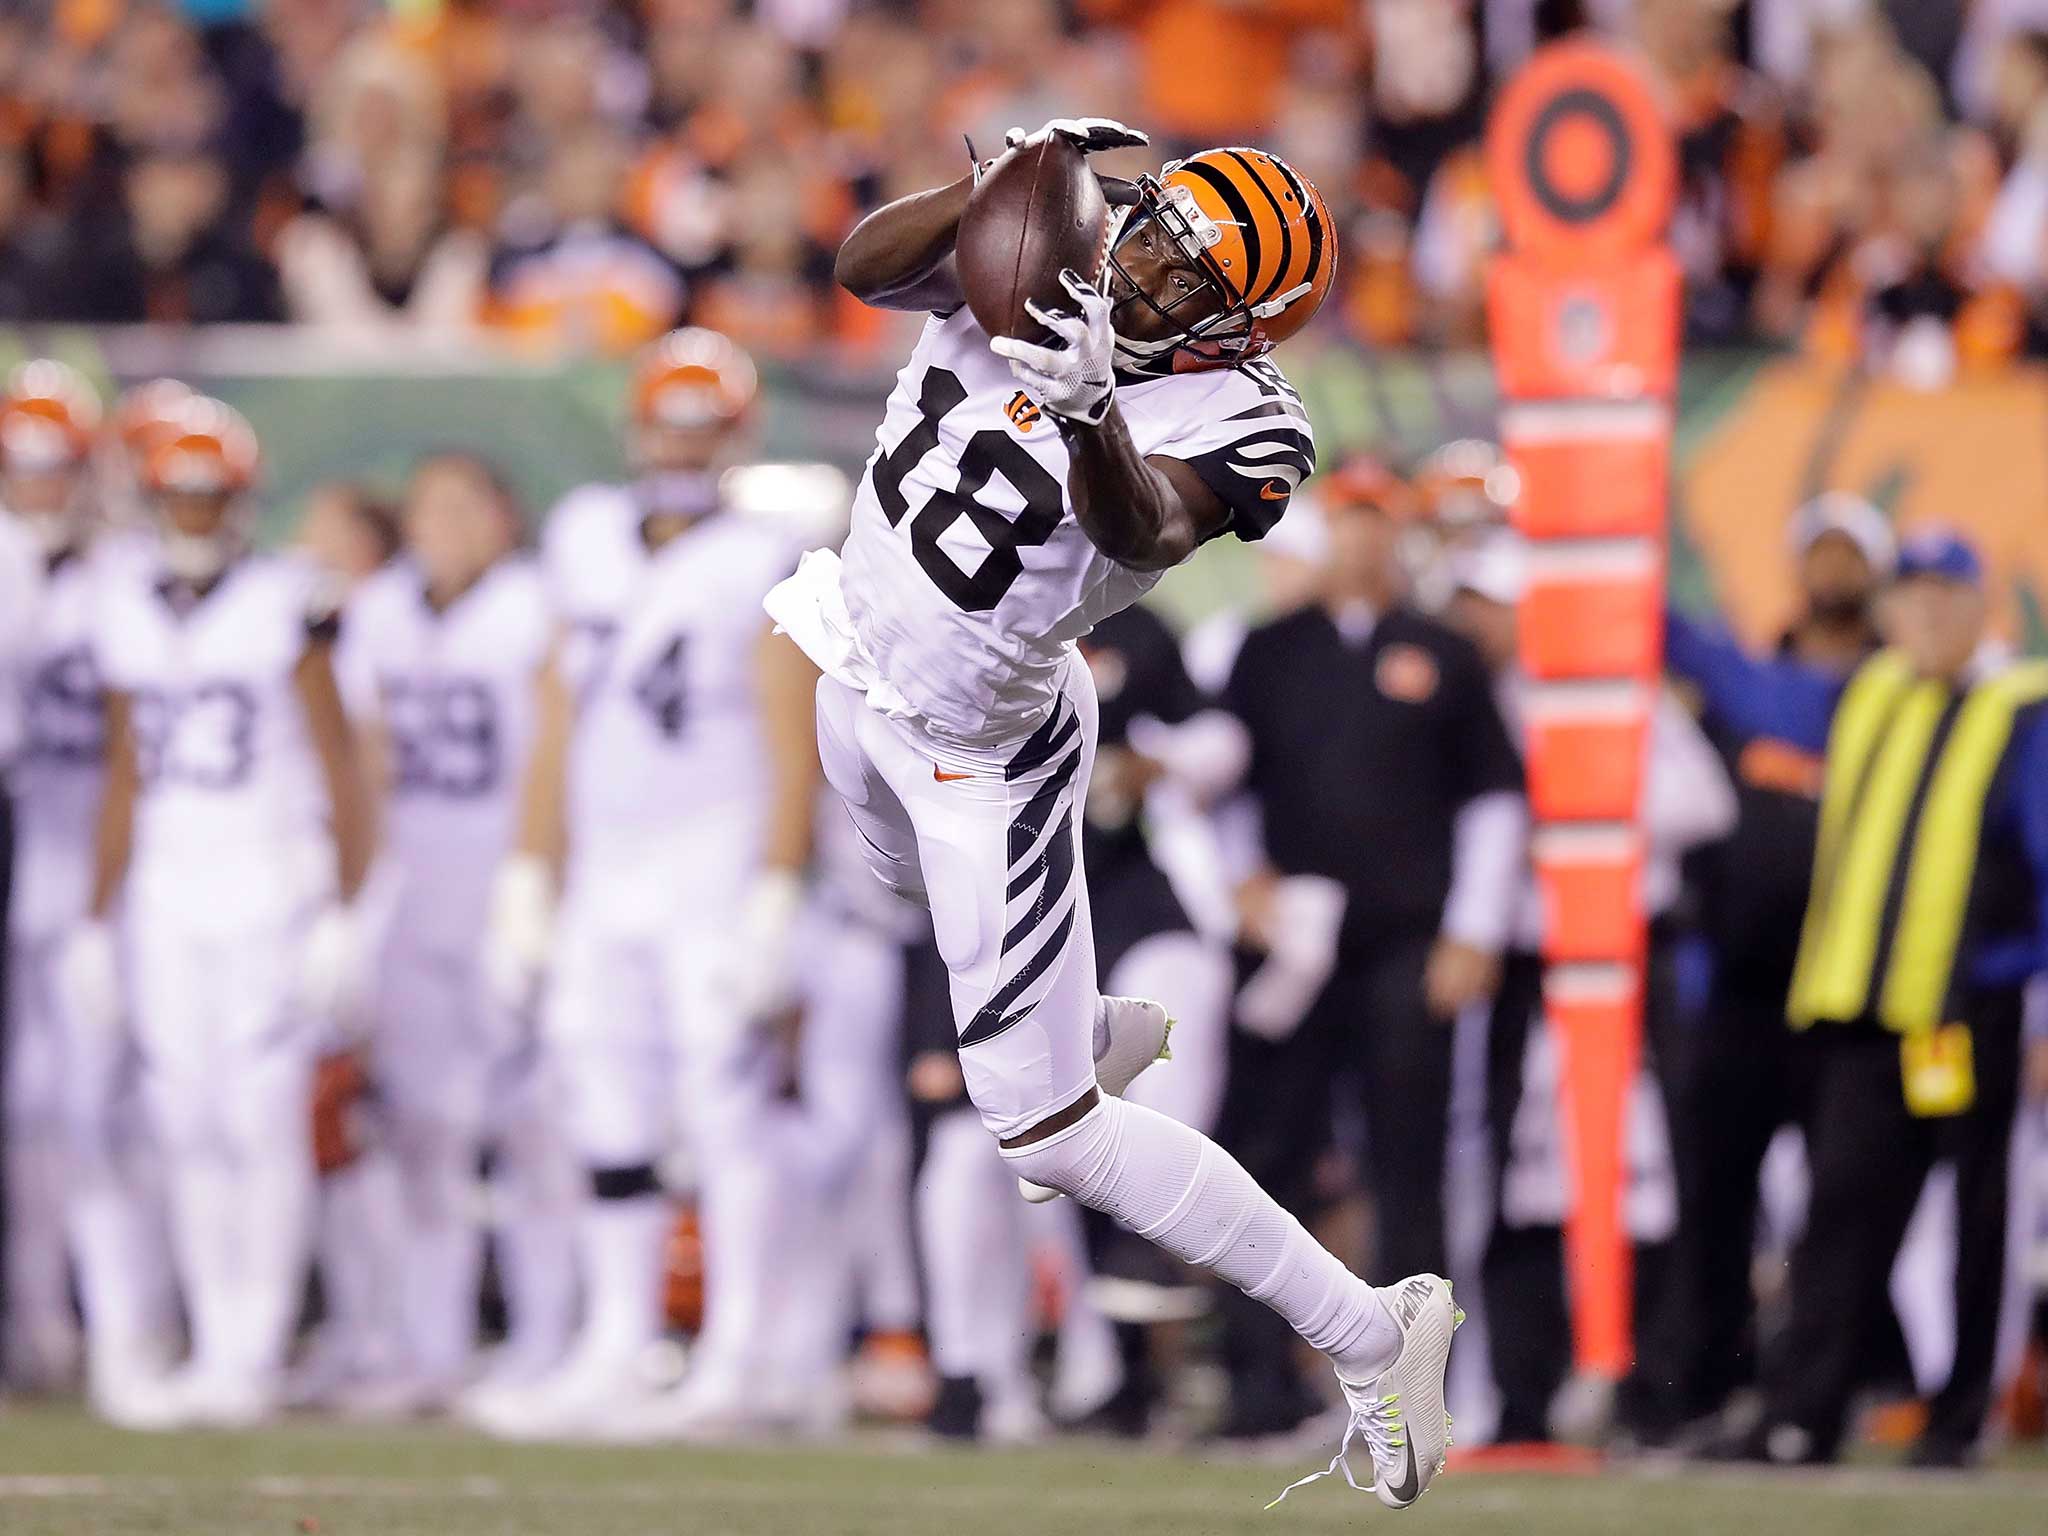 AJ Green catches a pass during the second quarter